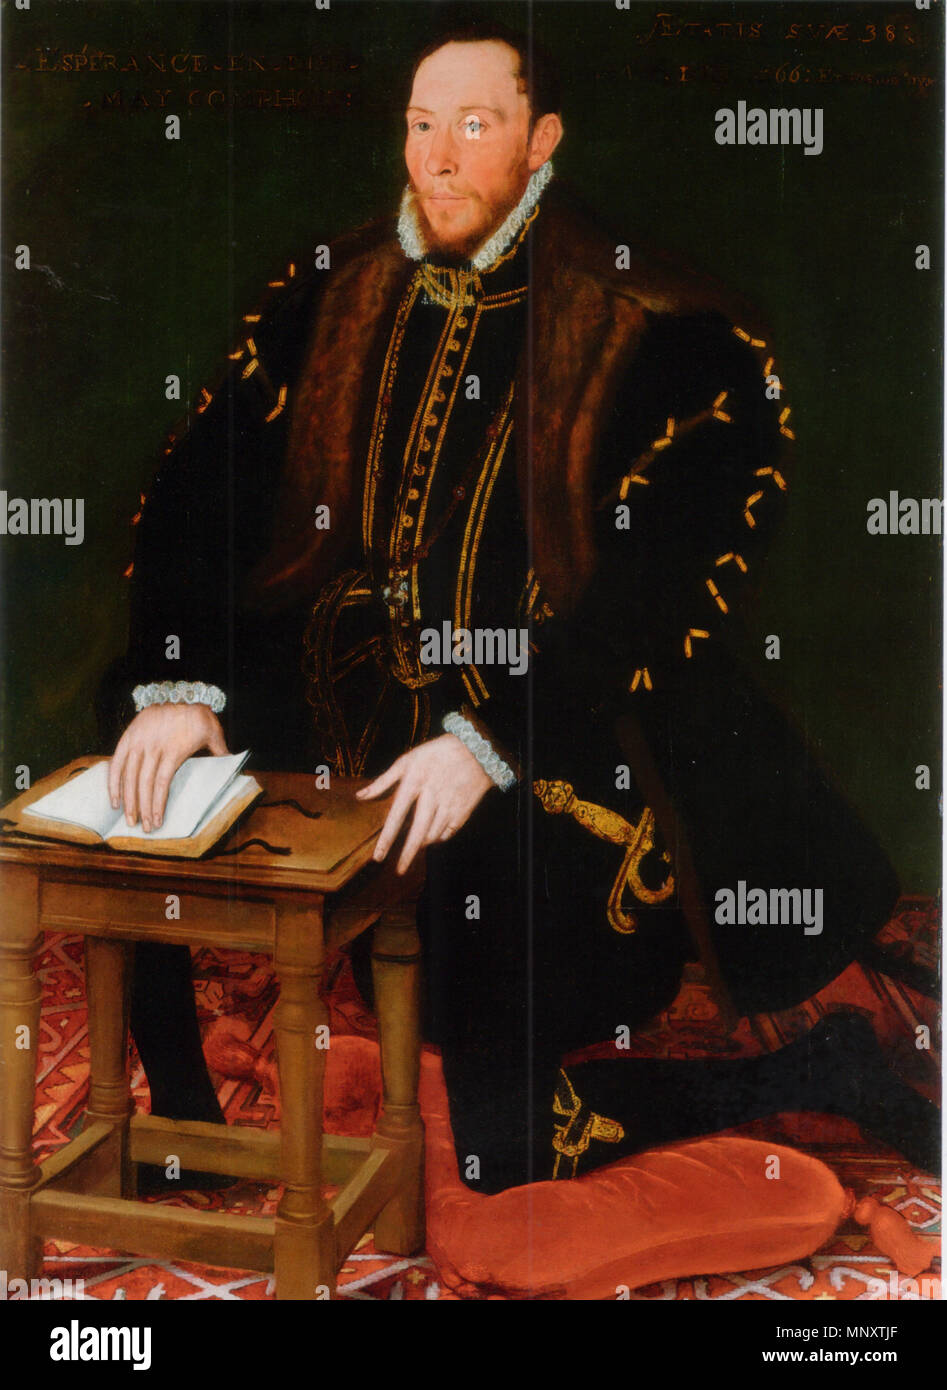 . Portrait of Blessed Thomas Percy, 7th Earl of Northumberland (1528-1570, at full length, kneeling on a cushion, wearing a black doublet with a fur trimmed cloak, a white ruff and the Order of the Garter collar and garter, reading a prayer book. 1566 (per inscription).   1189 Thomas Percy Earl of Northumberland 1566 Stock Photo